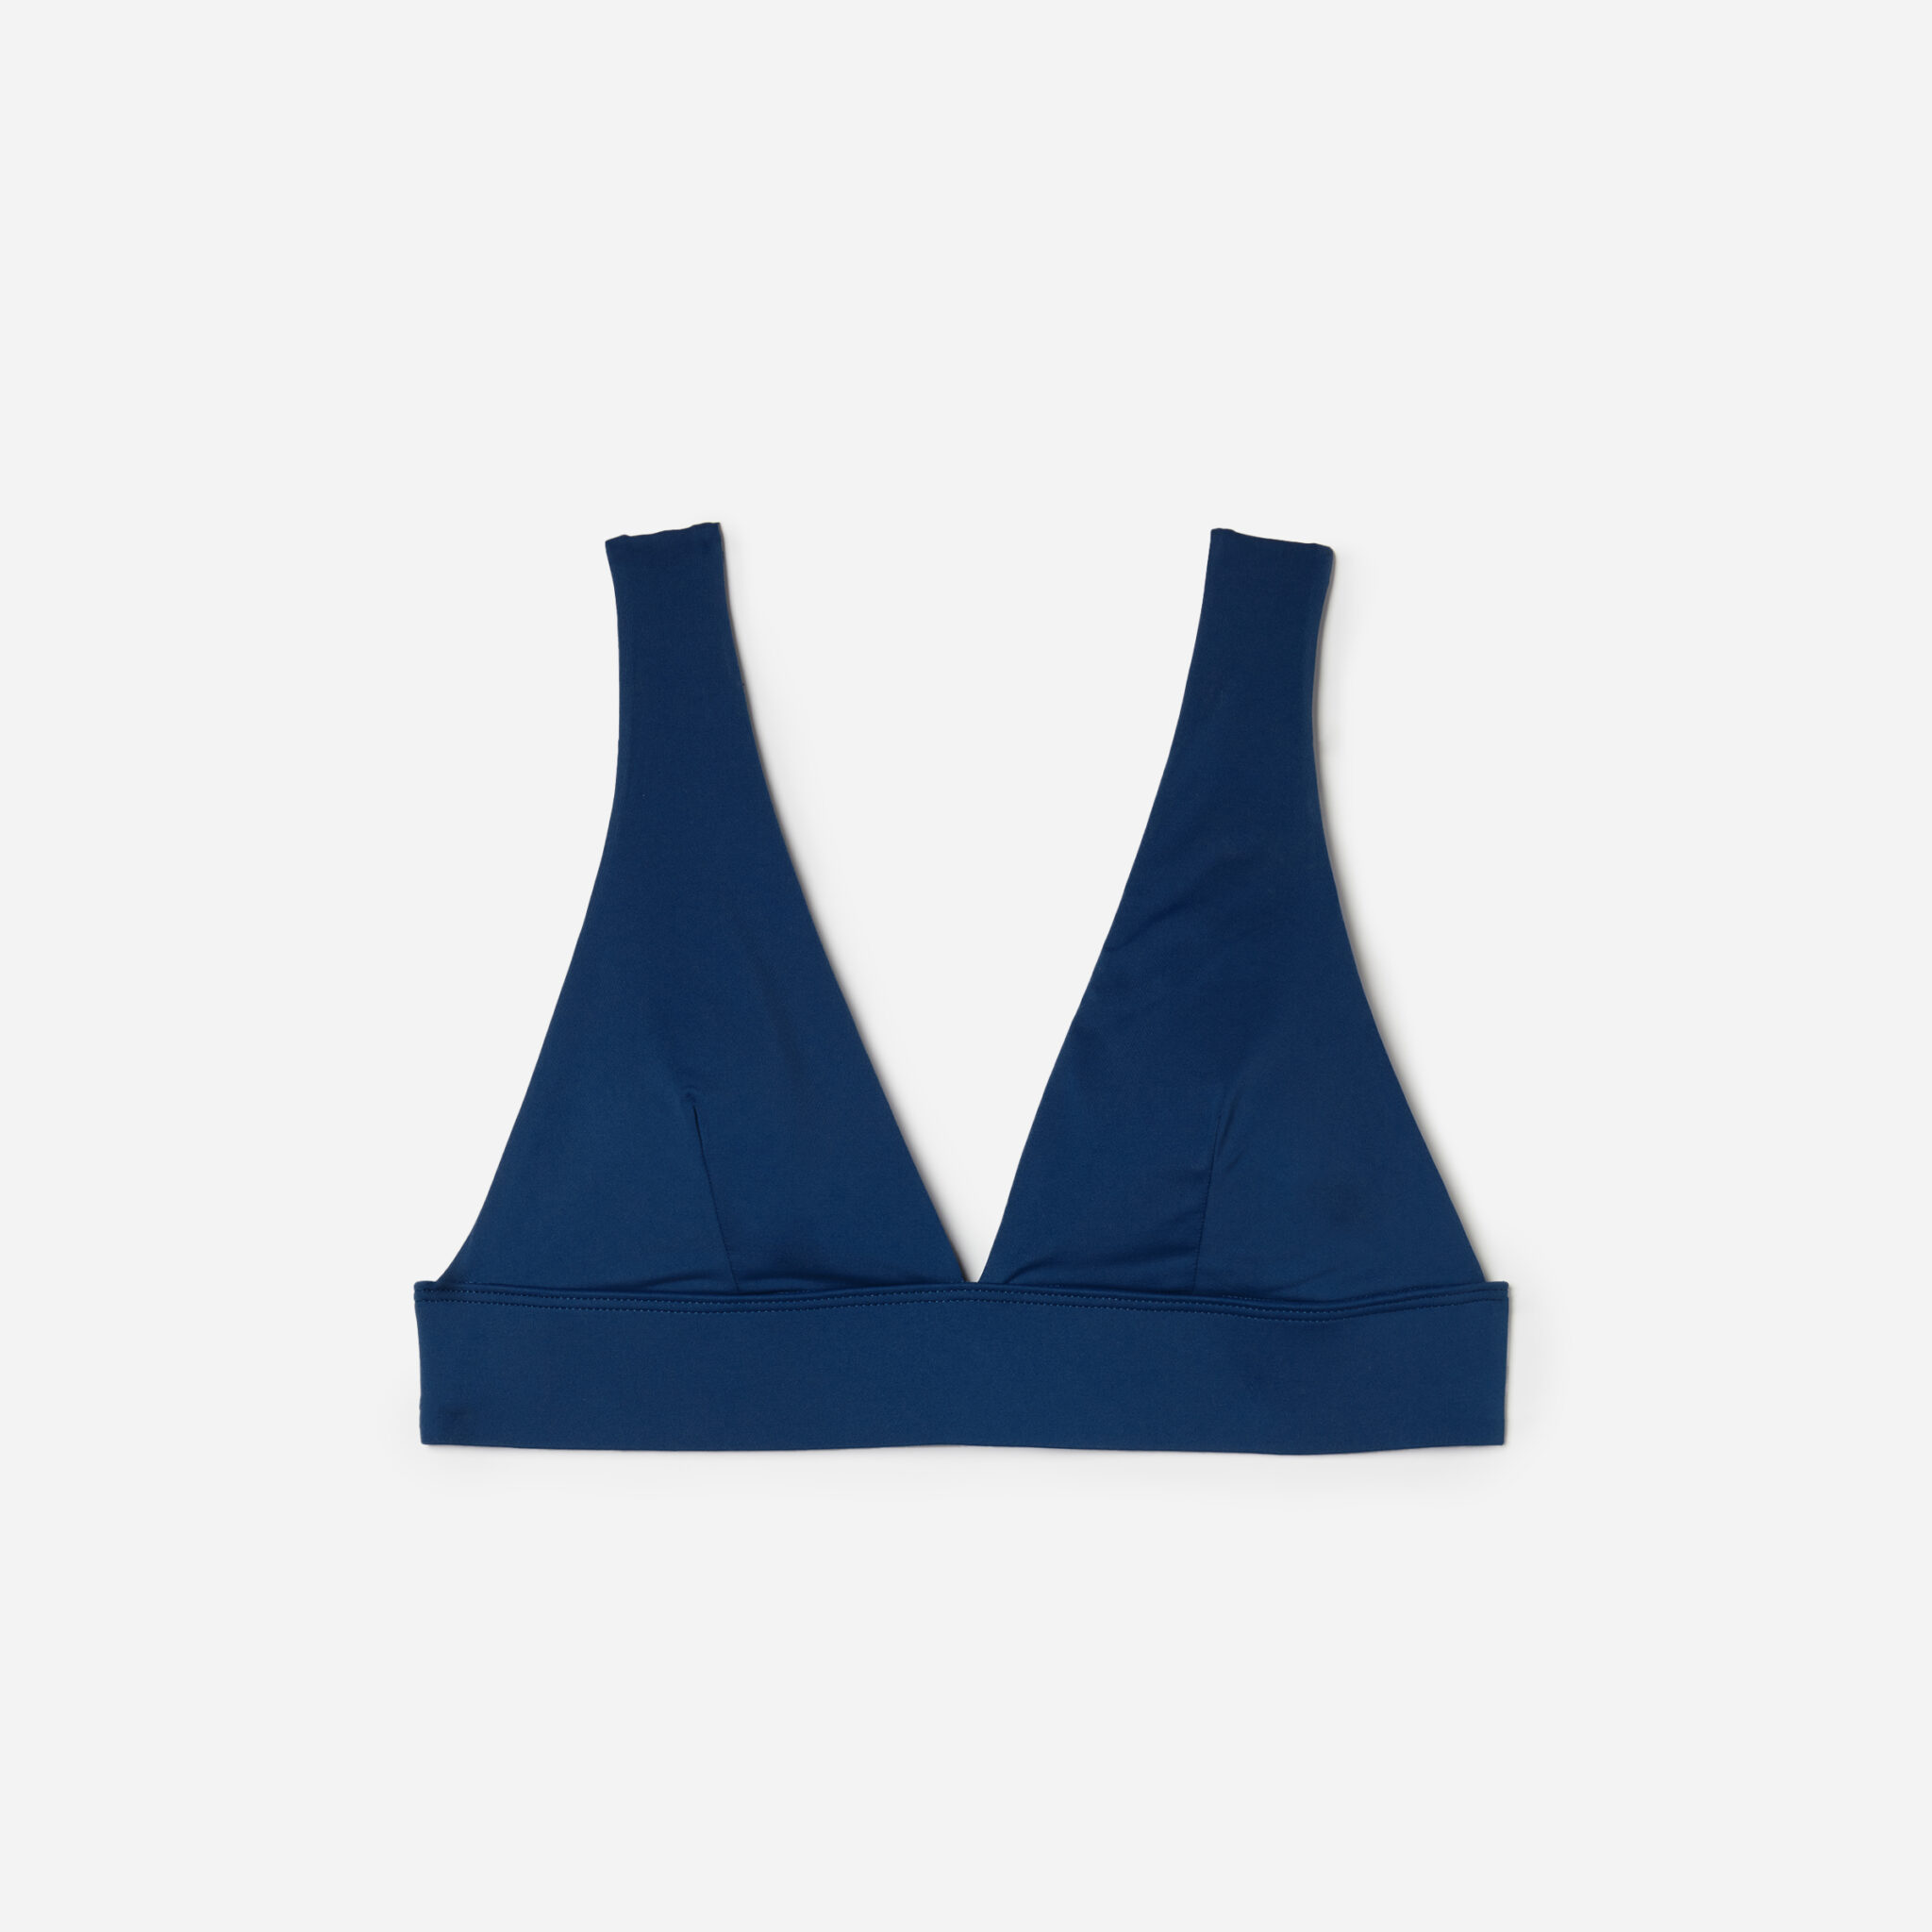 Everlane’s New Swimsuit for Your Summer Getaway